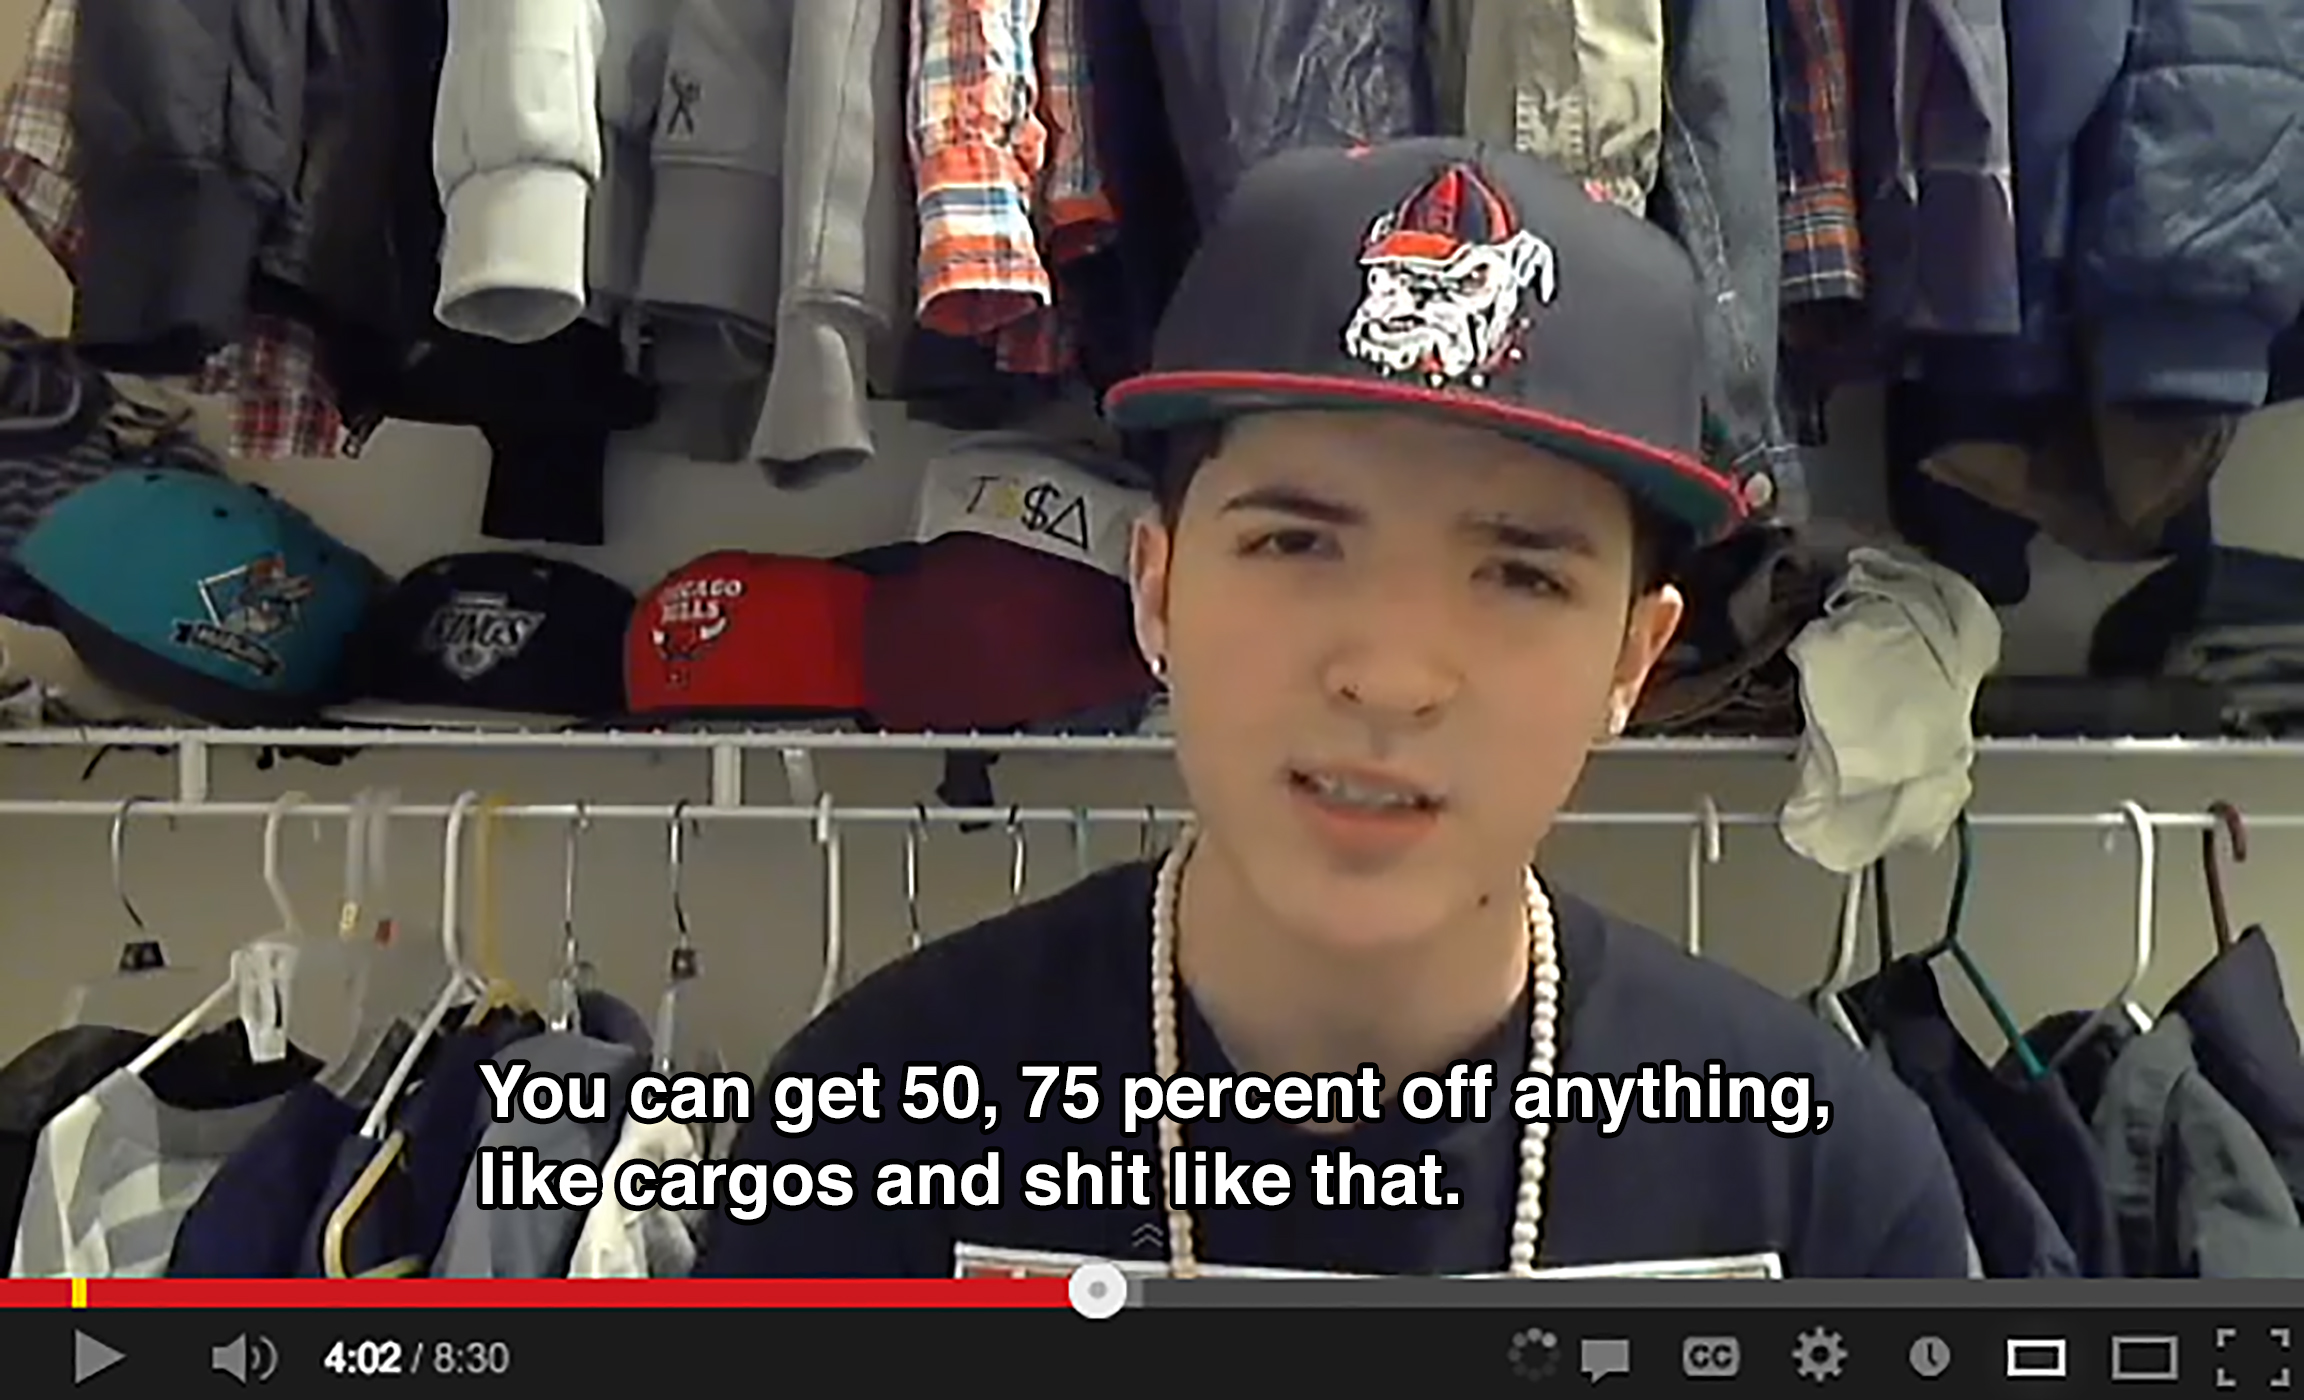 A teenager wearing a hat with a bulldog on it stands in his closet, which has many hats and jackets, and says: You can get 50, 75 percent off anything, like cargos and shit like that.